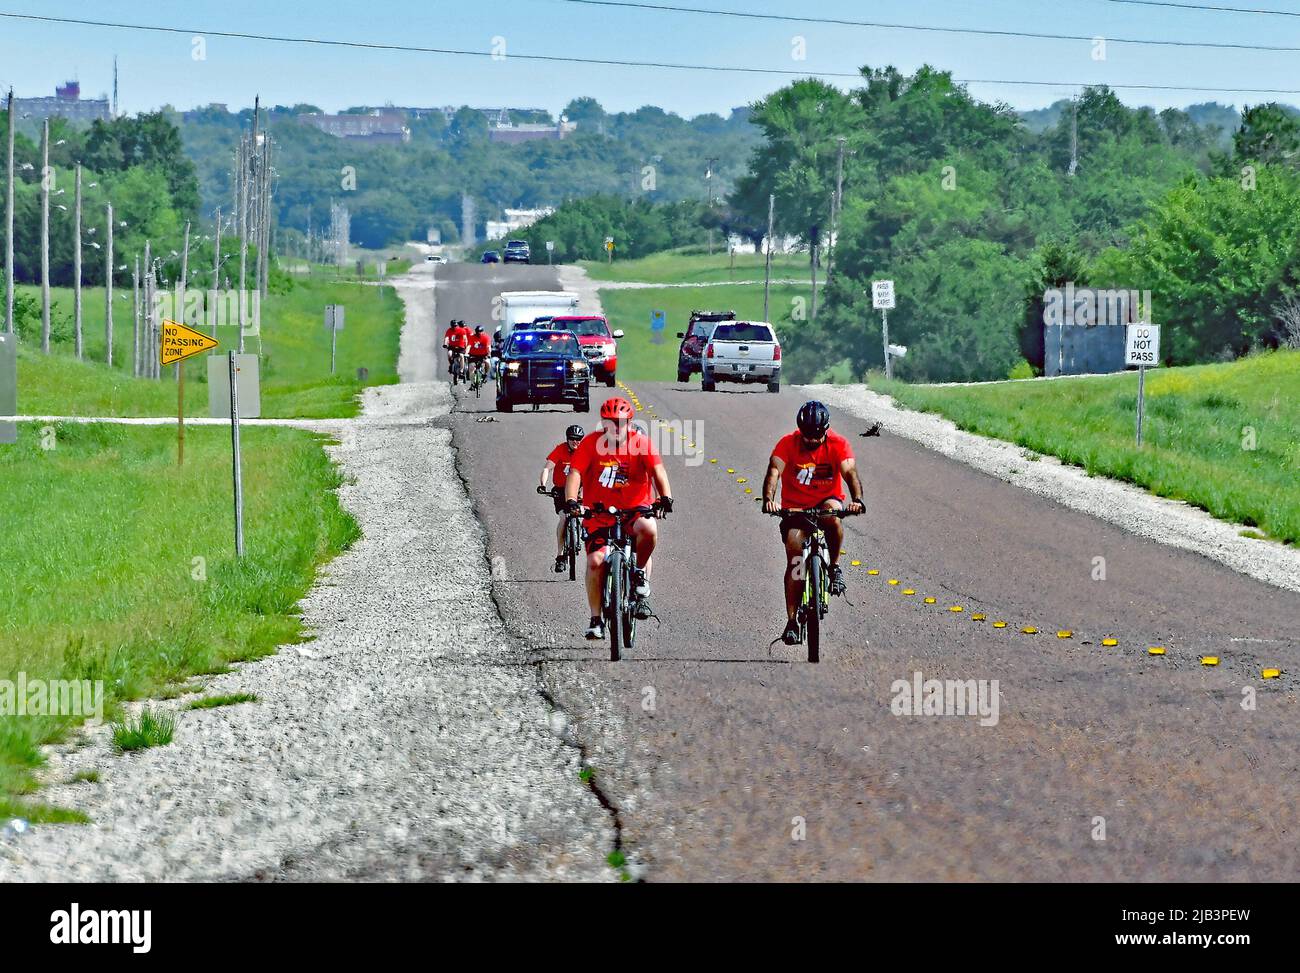 EMPORIA, KANSAS - JUNE 2, 2022 Local police officers and sheriffs deputies riding bicycles escort the Flame of Hope for Special Olympics south along state route 99 outside of Emporia on the way 90 miles south to Wichita during the Kansas Law Enforcement Torch Run to raise awareness and funds to benefit the organization Stock Photo